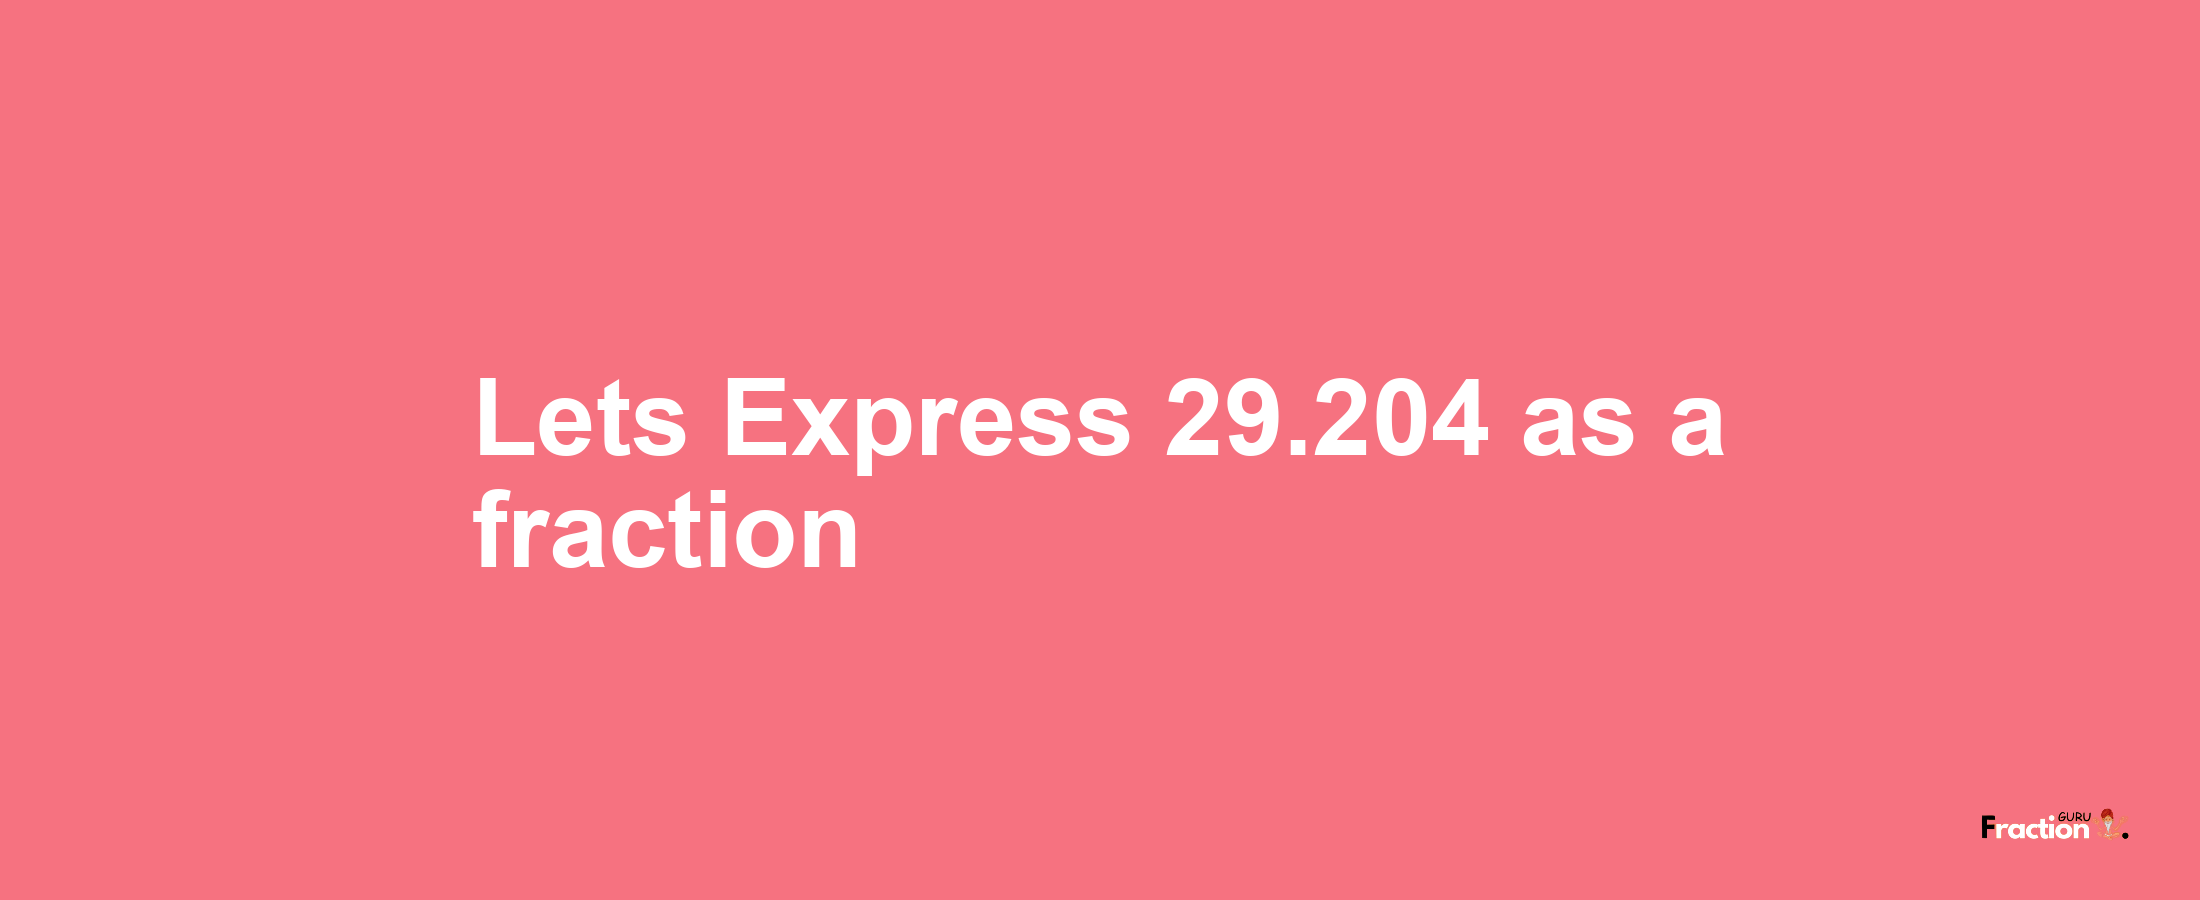 Lets Express 29.204 as afraction